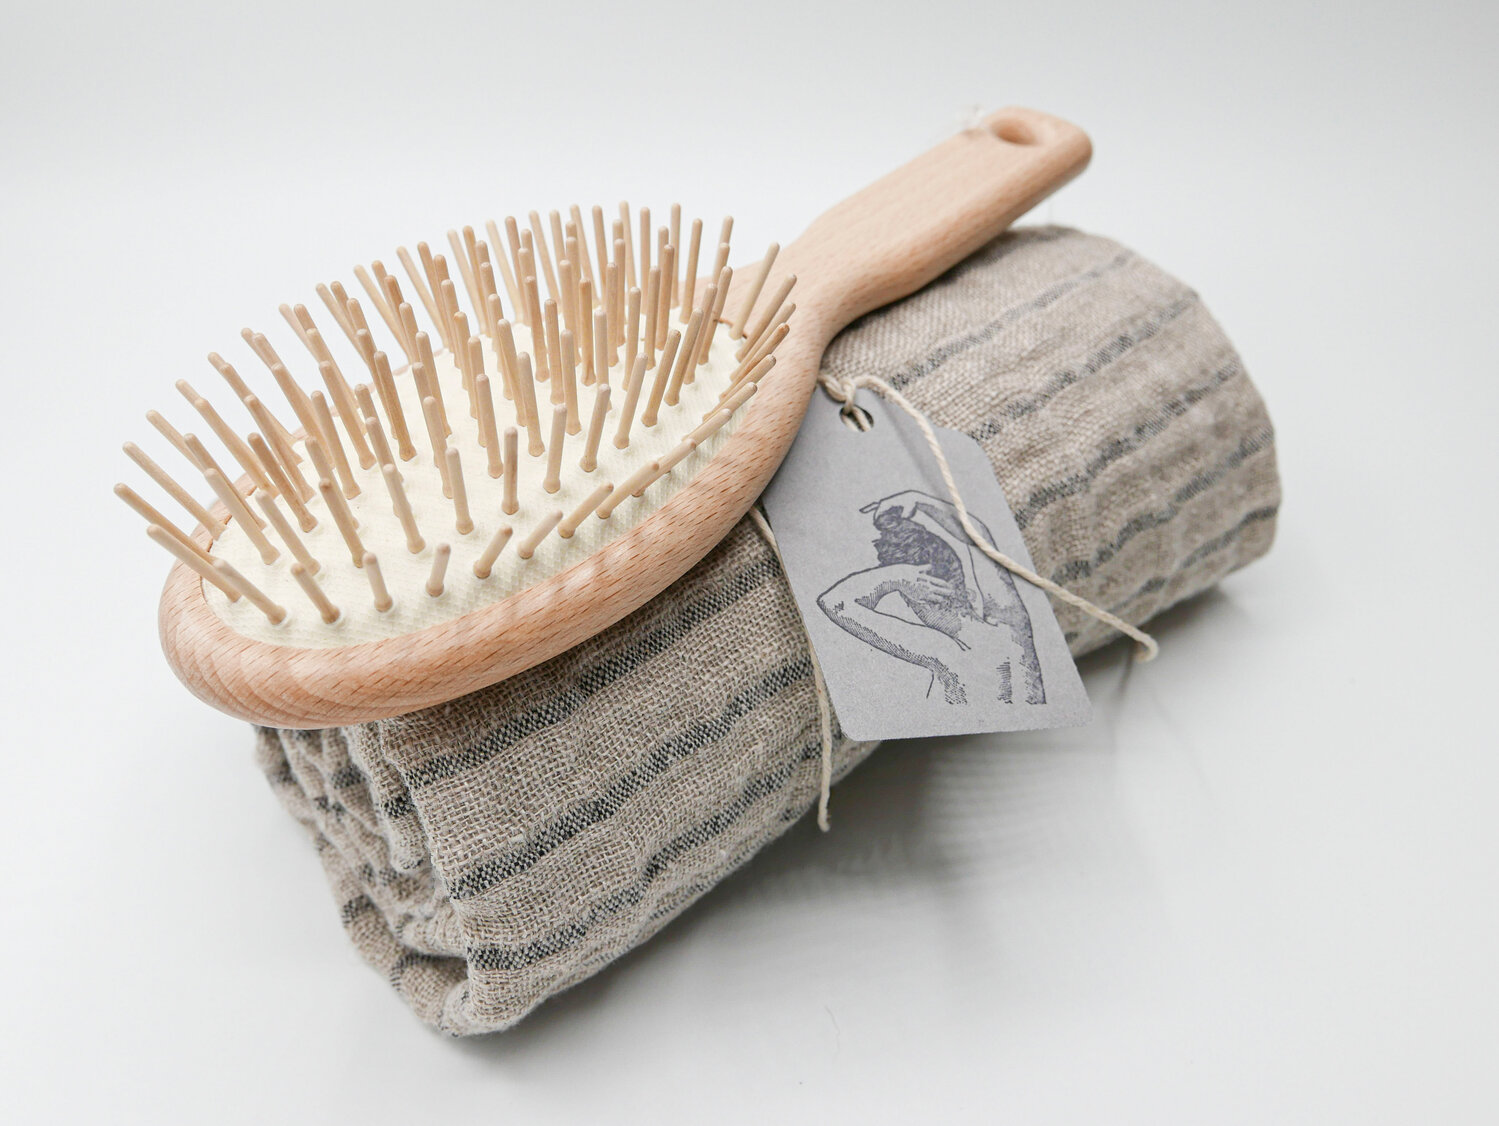 Every item at Susan Muzio Blake’s Muzio Designs on John Wise Avenue feels hand-picked.  Like a light, Goodlinens organic woven hair towel, $36, a beech wood hairbrush, $27, or an indulgent LAFCO candle (which has a cult following), $45. Muzio Designs  55 John Wise Avenue, Essex  (978) 890-7160 